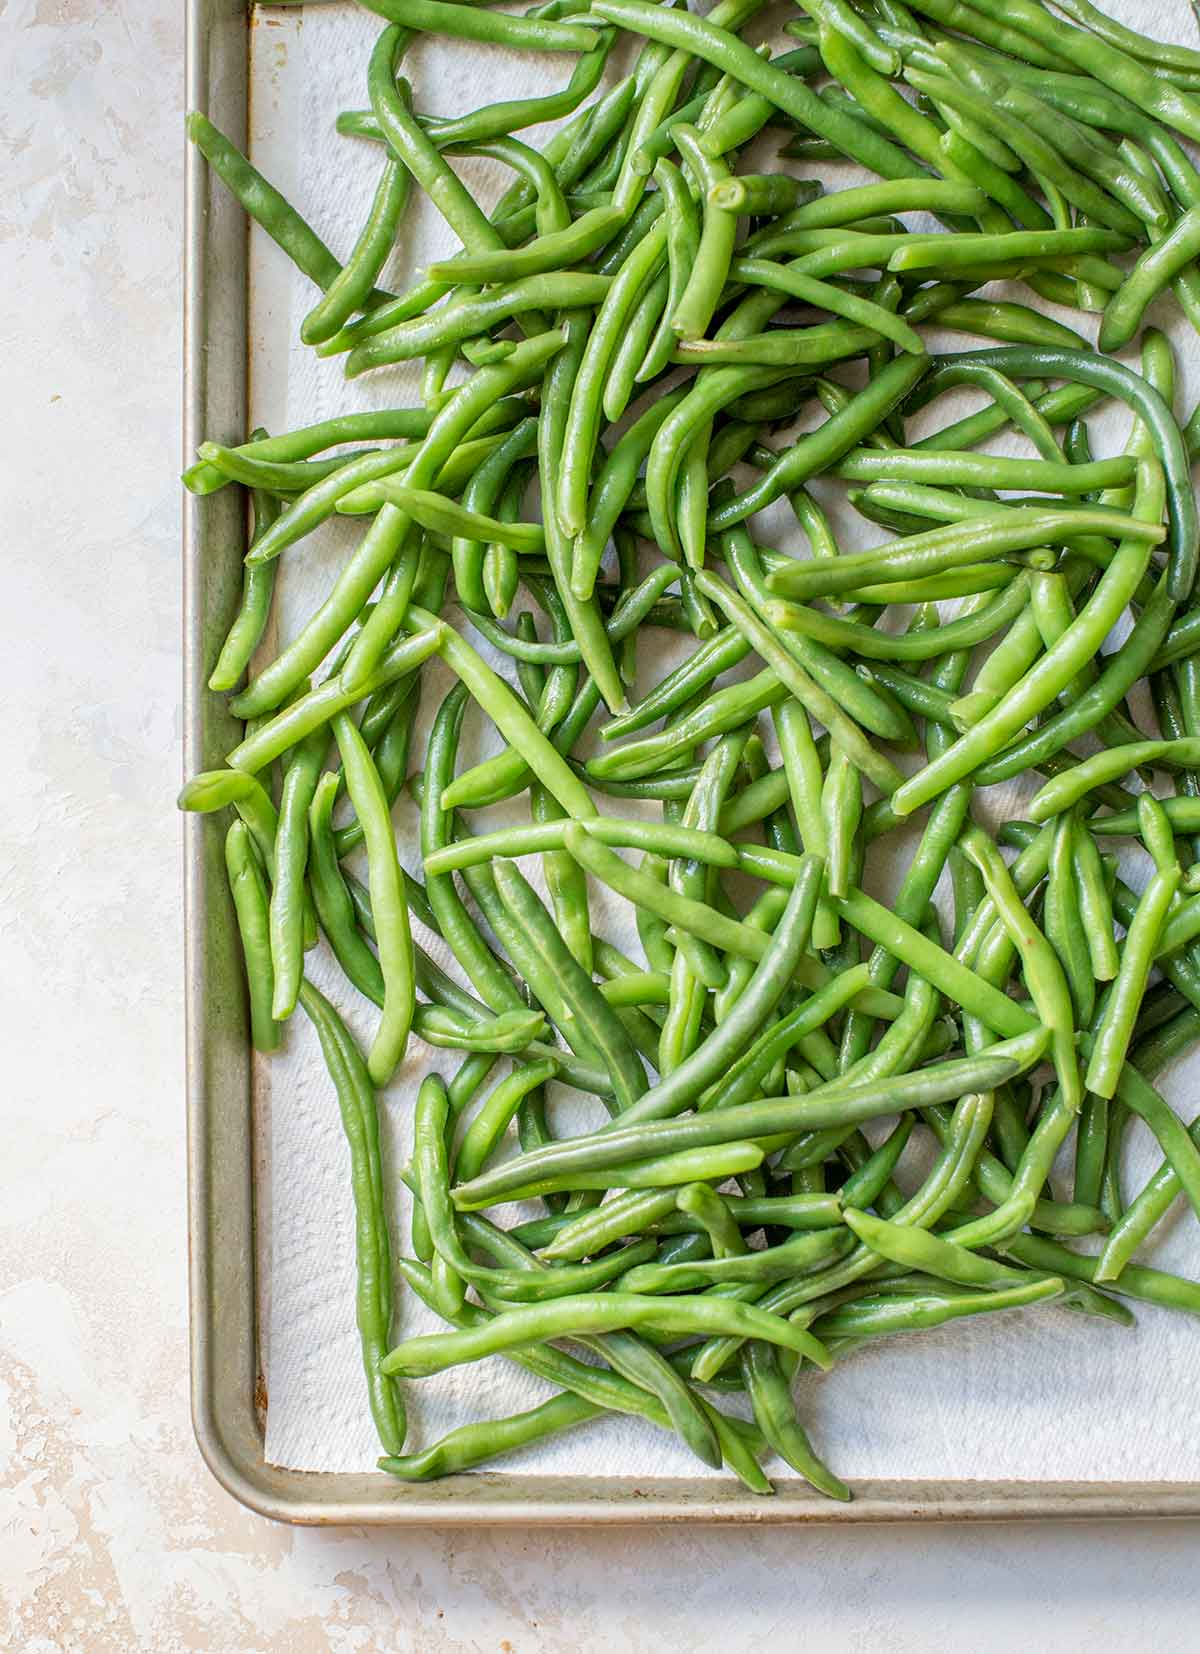 Photo of fresh green beans spread out on a paper towel-lined baking sheet.